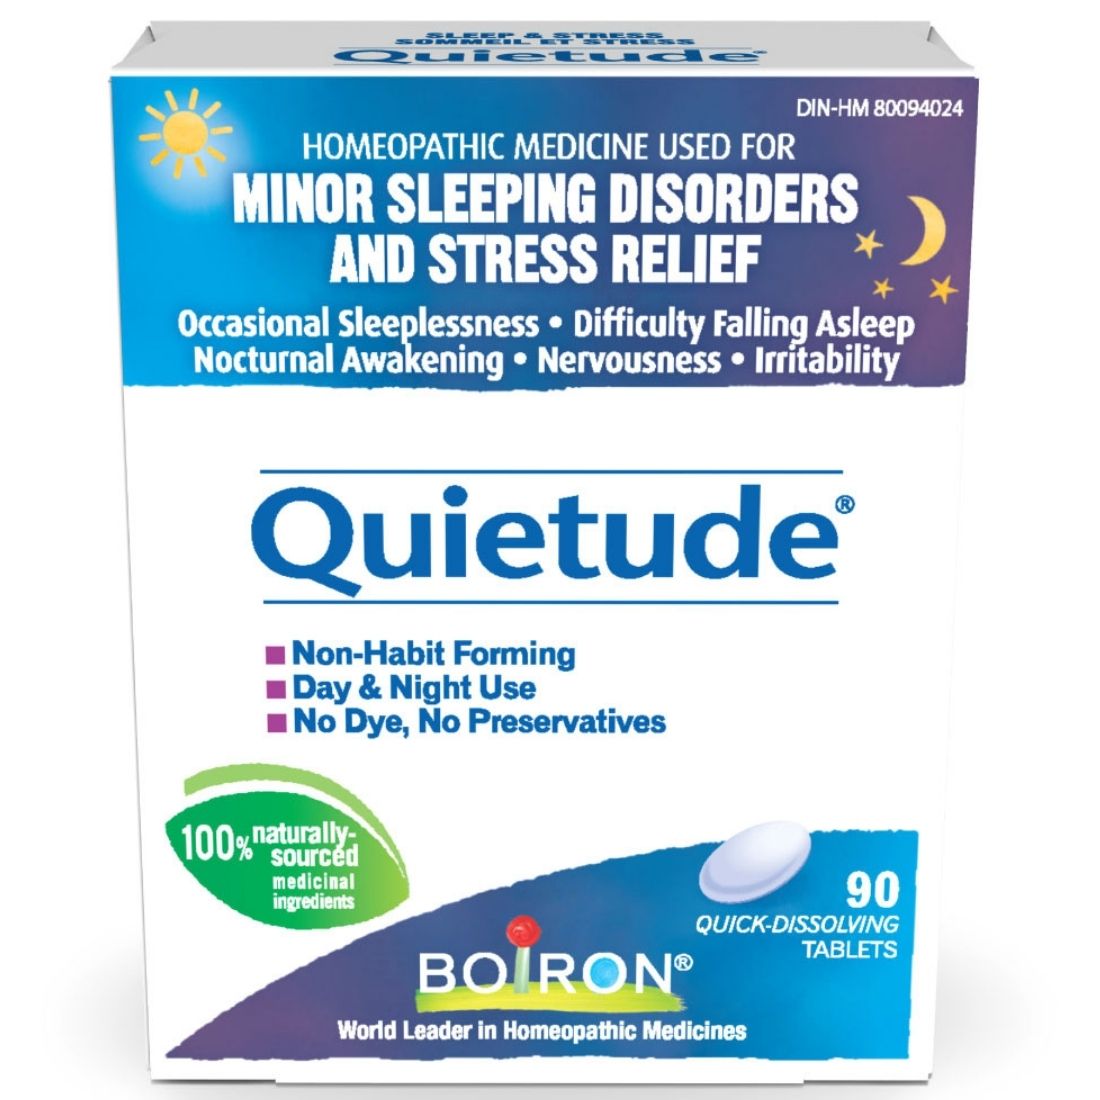 Boiron Quietude, For Minor Sleeping Disorders and Stress Relief, 90 Quick Dissolving Tablets